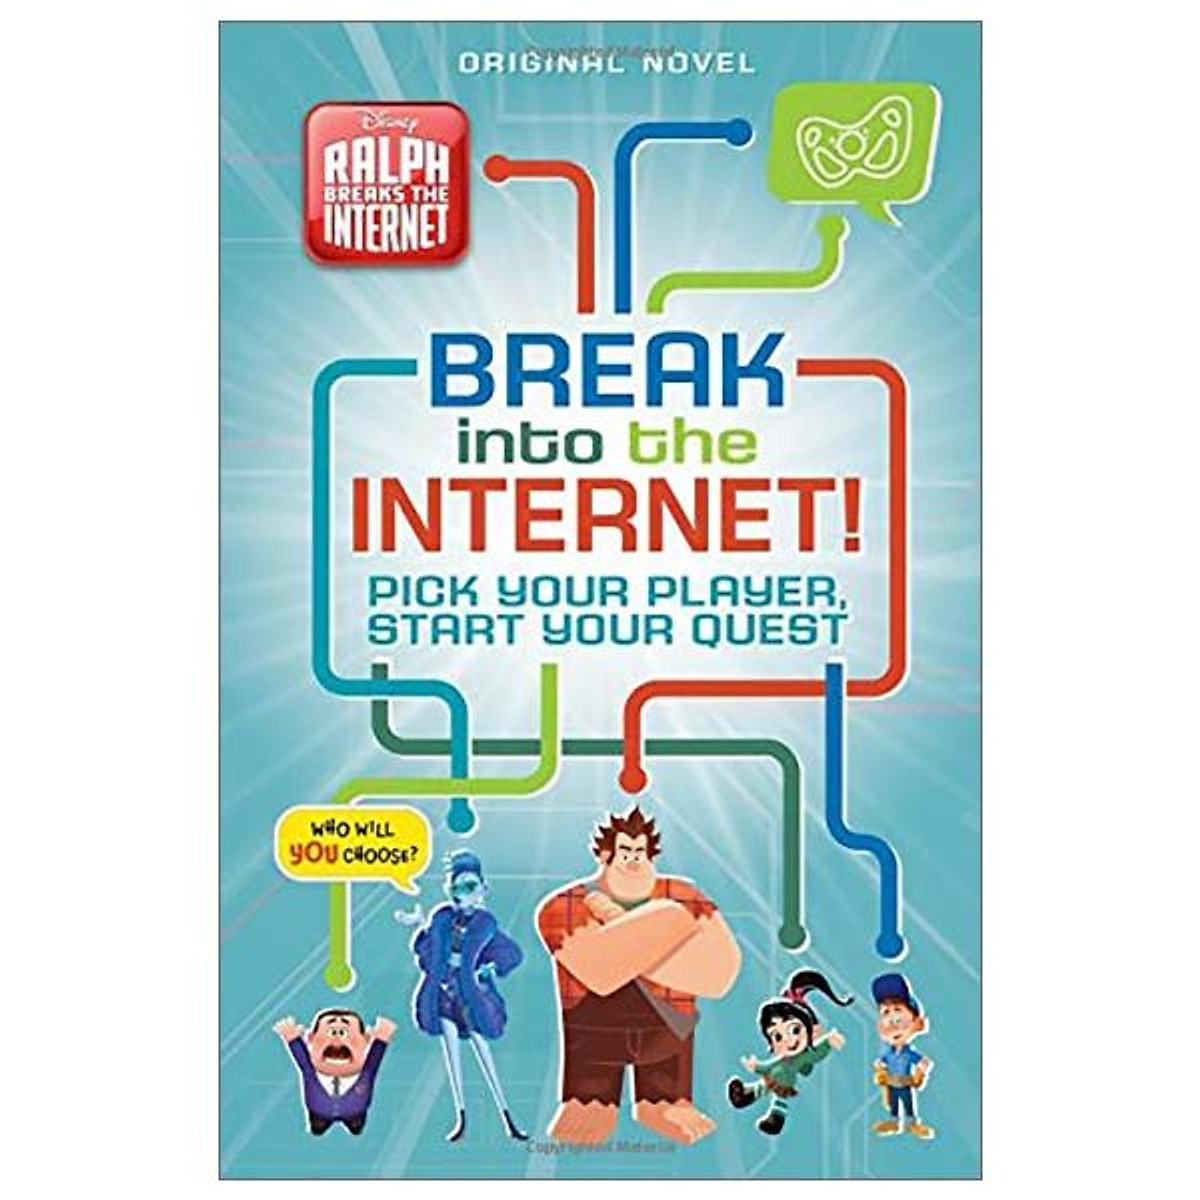 Ralph Breaks The Internet: Break Into The Internet!: Pick Your Player, Start Your Quest